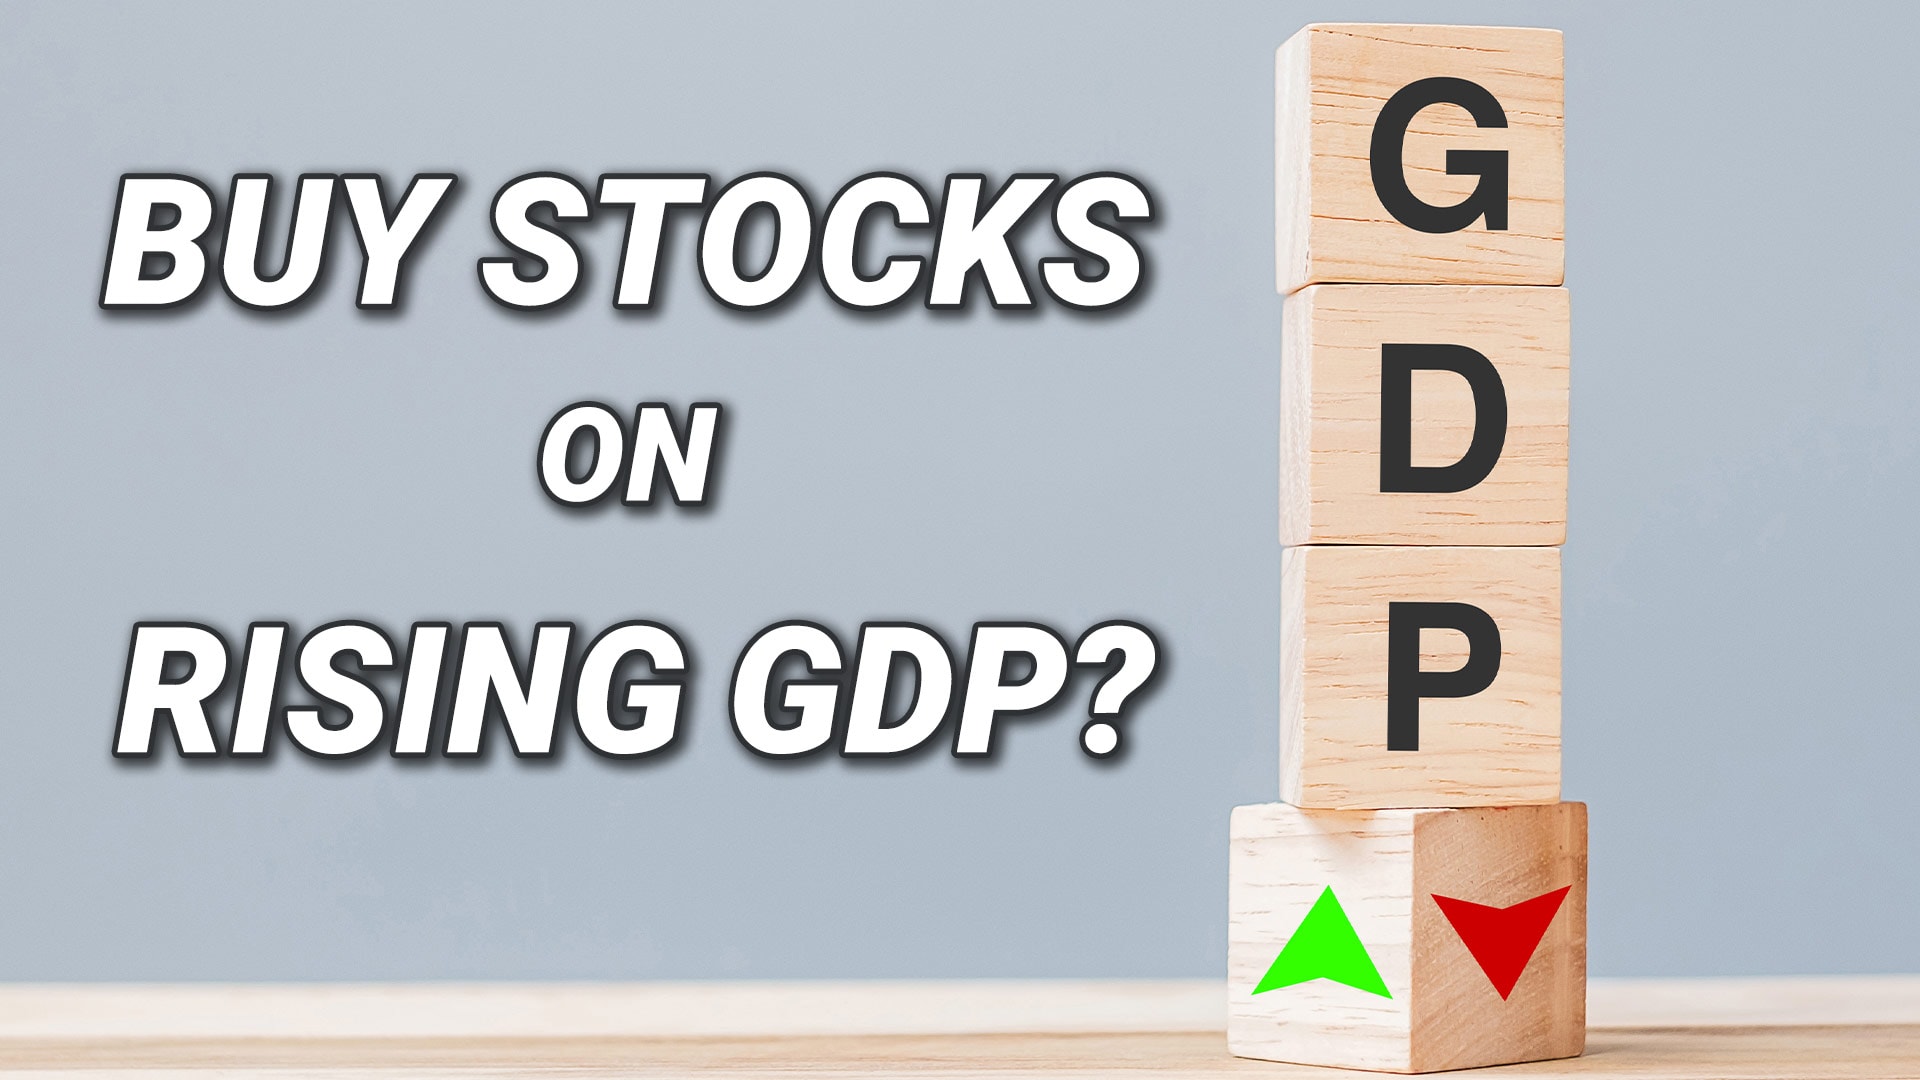 Let’s Examine the Claim That GDP Drives Stock Prices